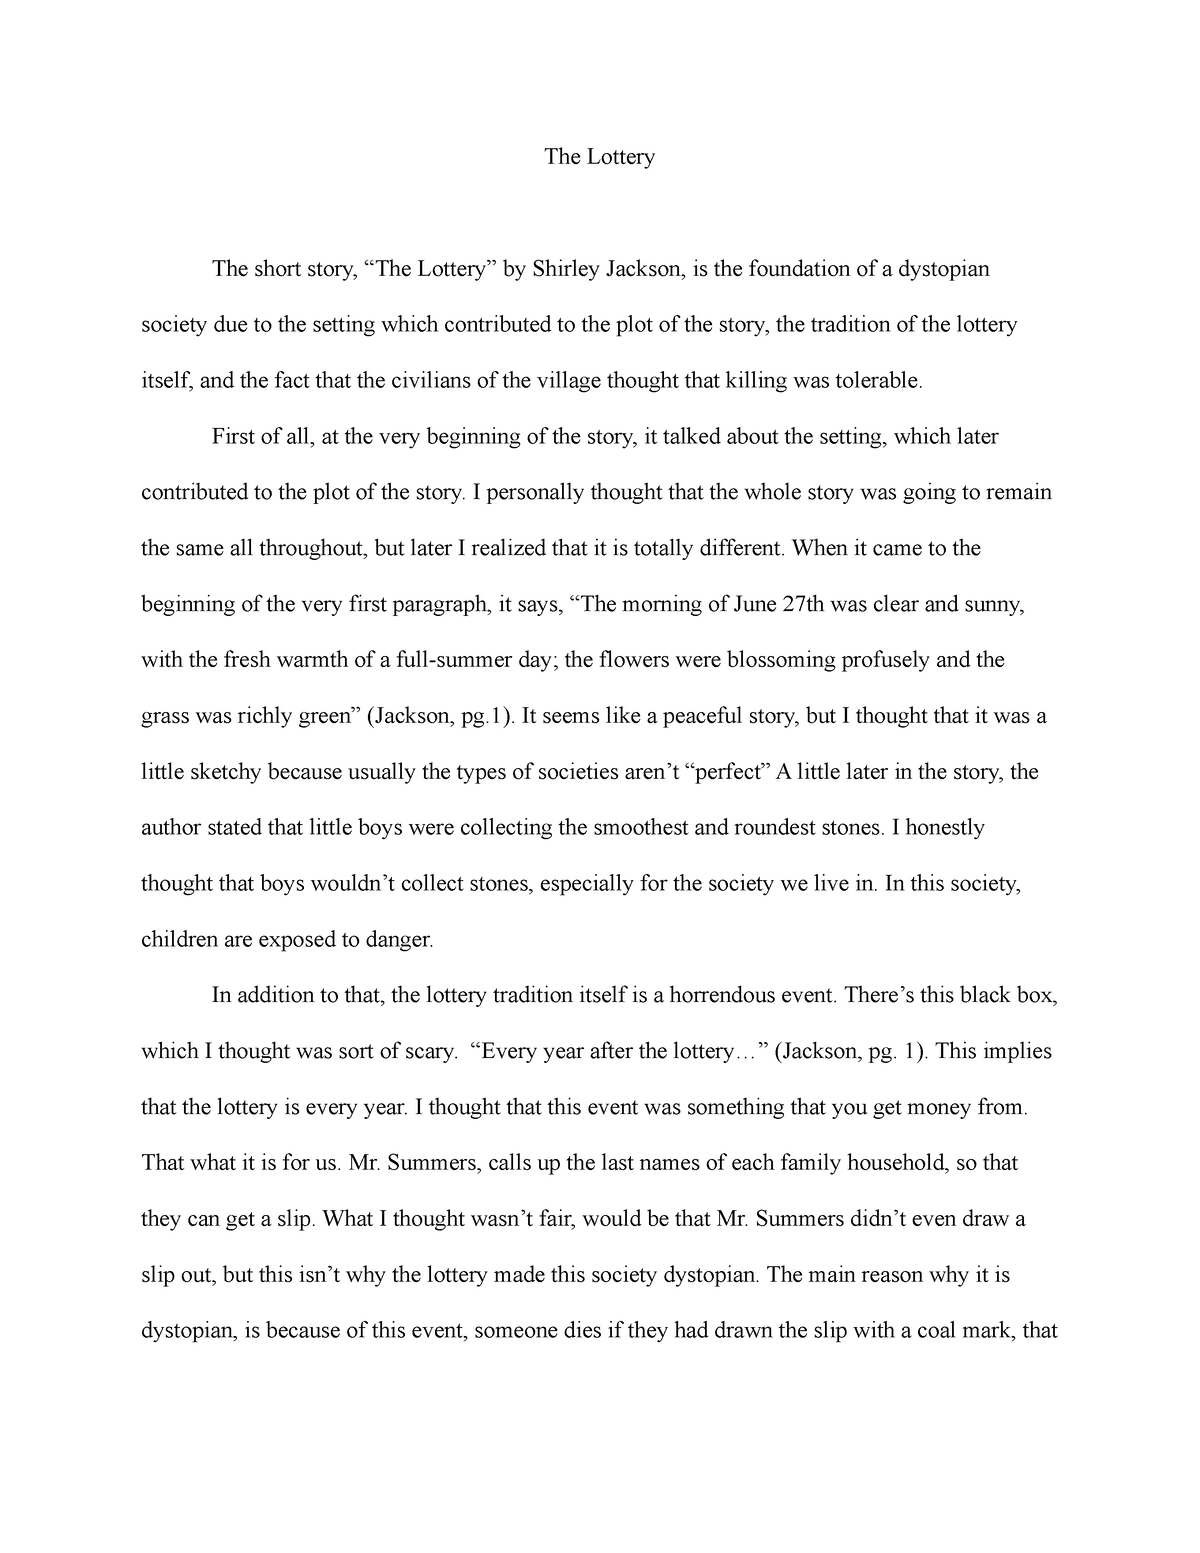 essay about the short story the lottery